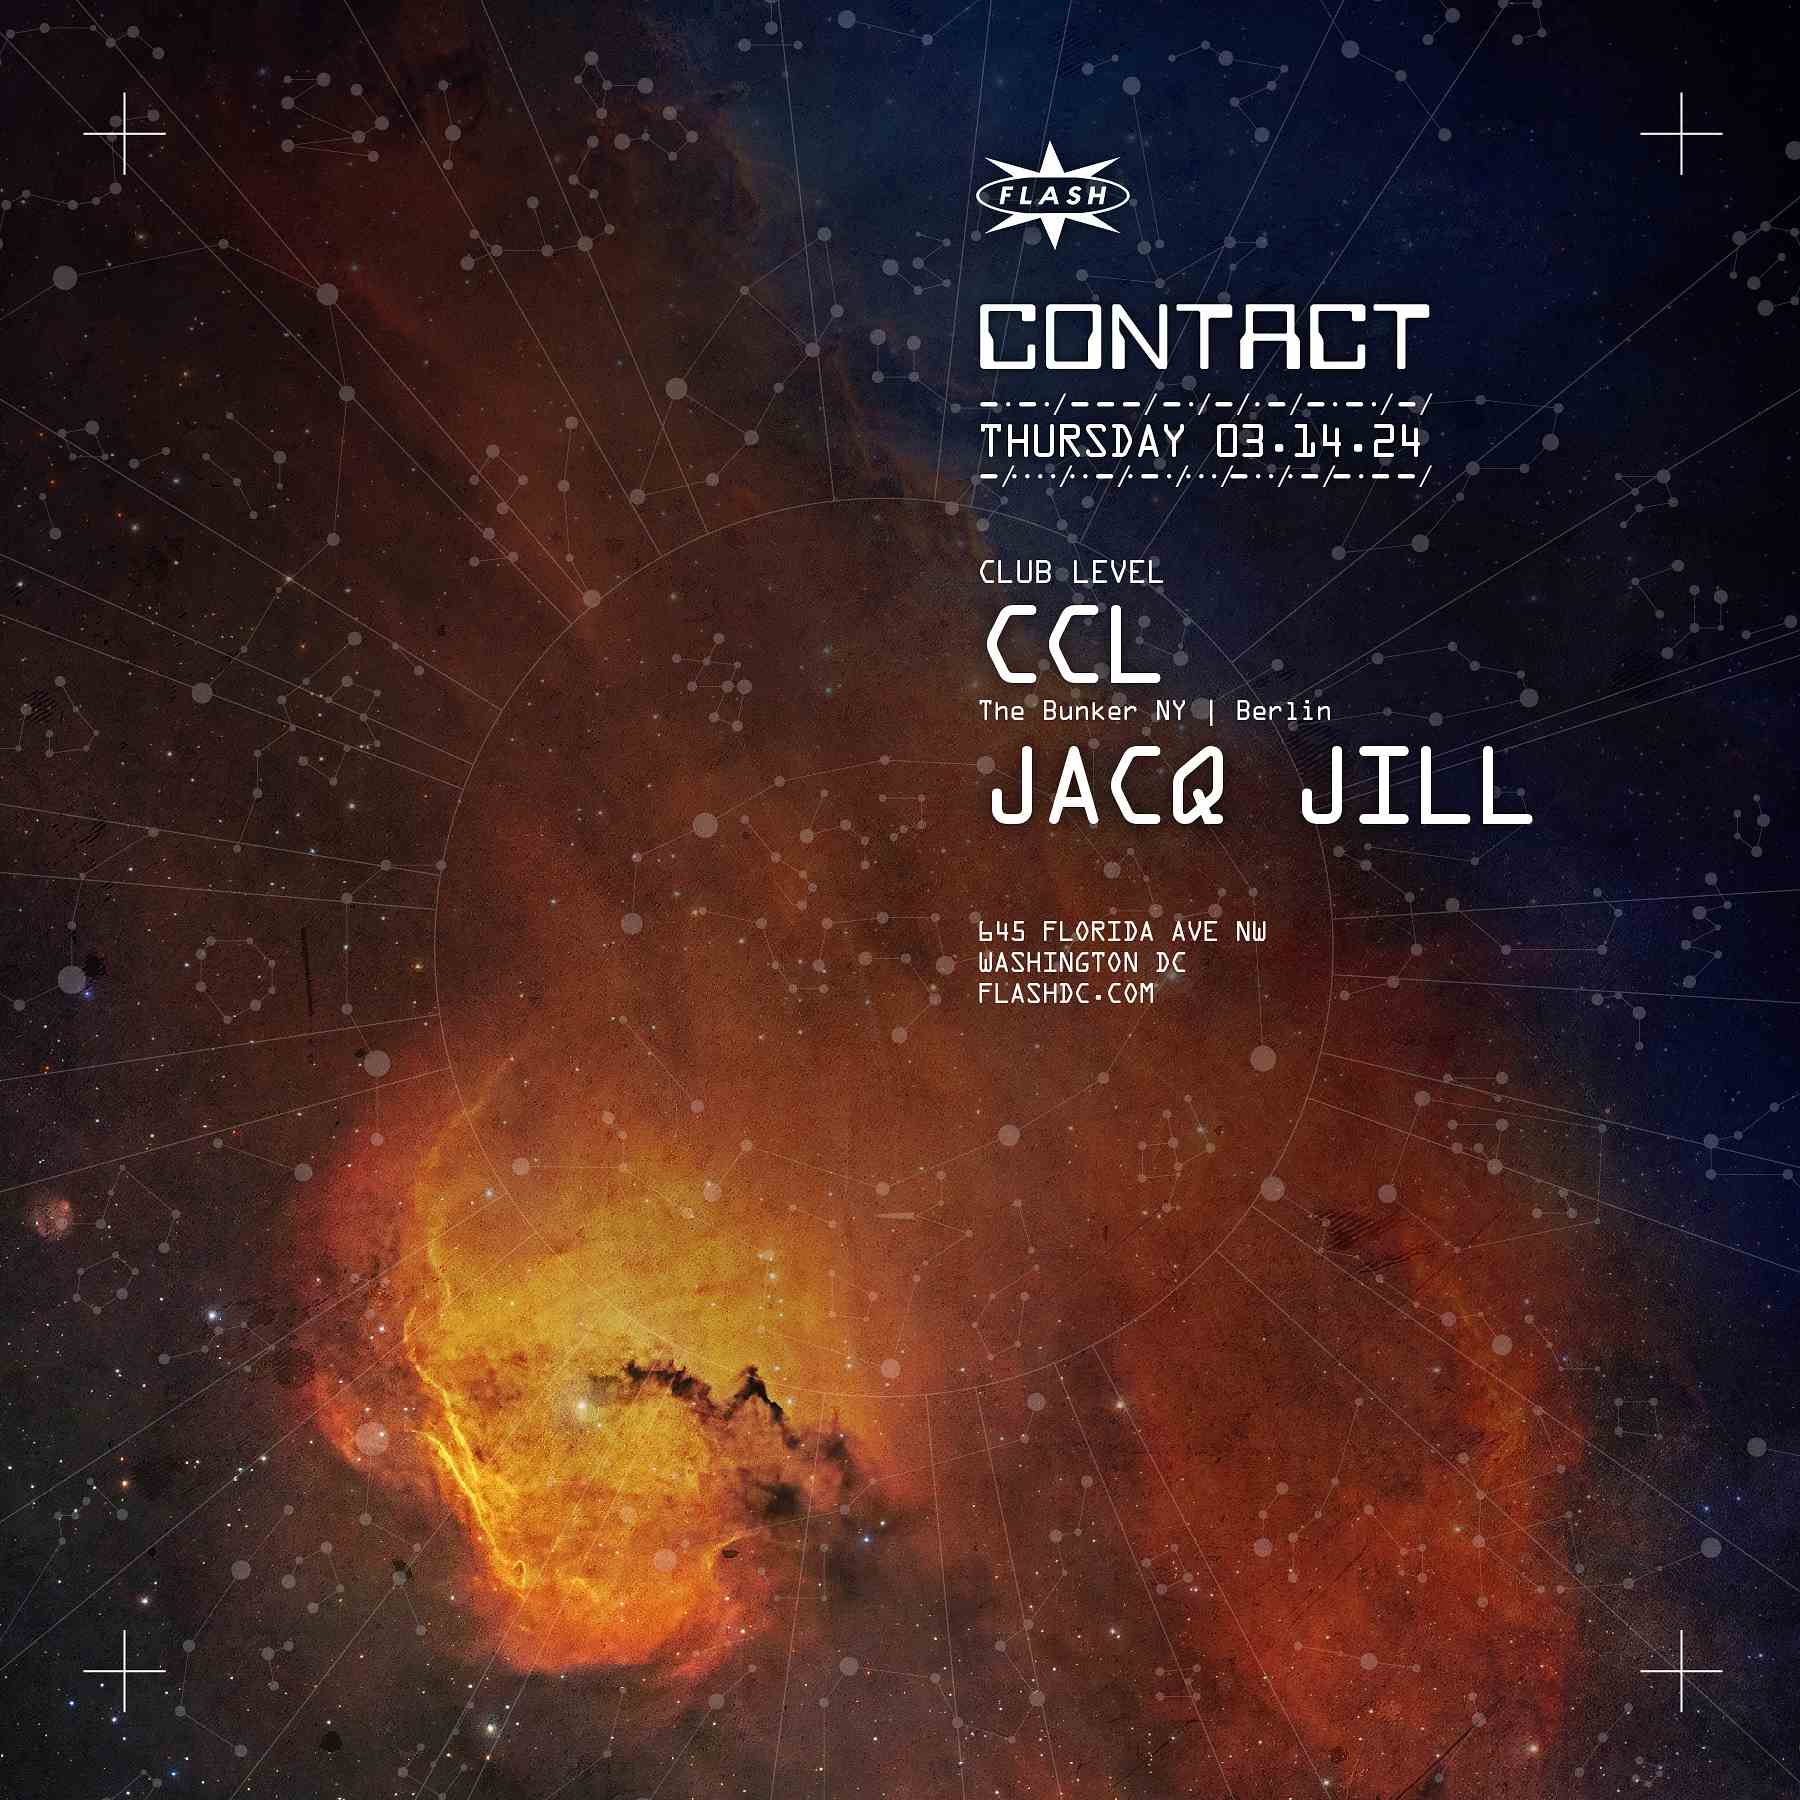 CONTACT: CCL event flyer